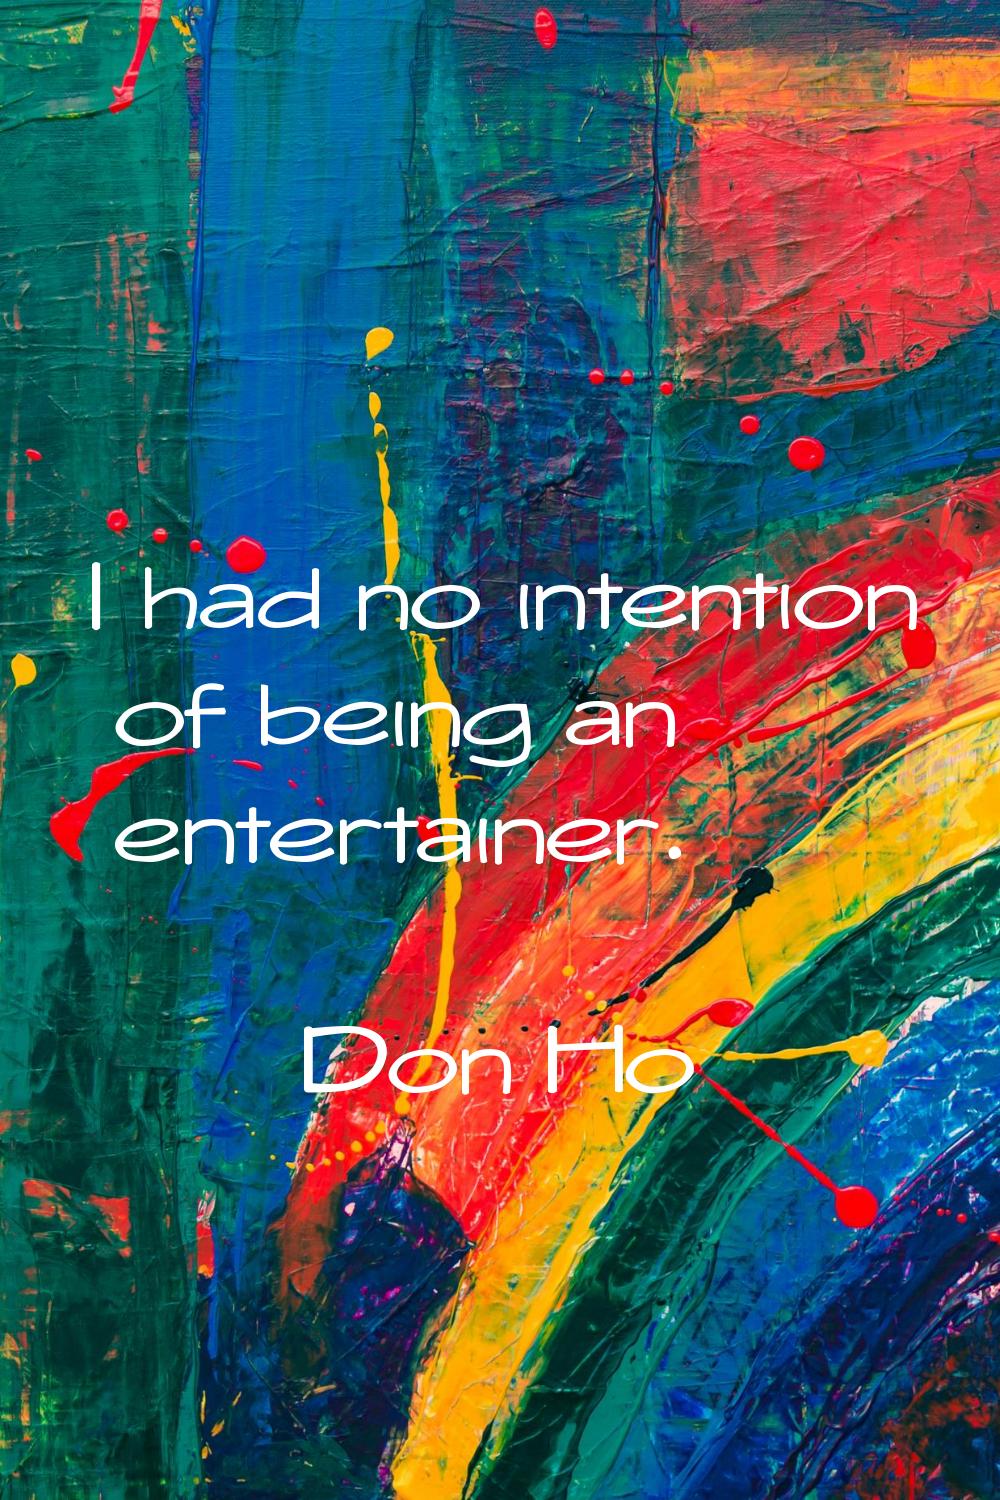 I had no intention of being an entertainer.